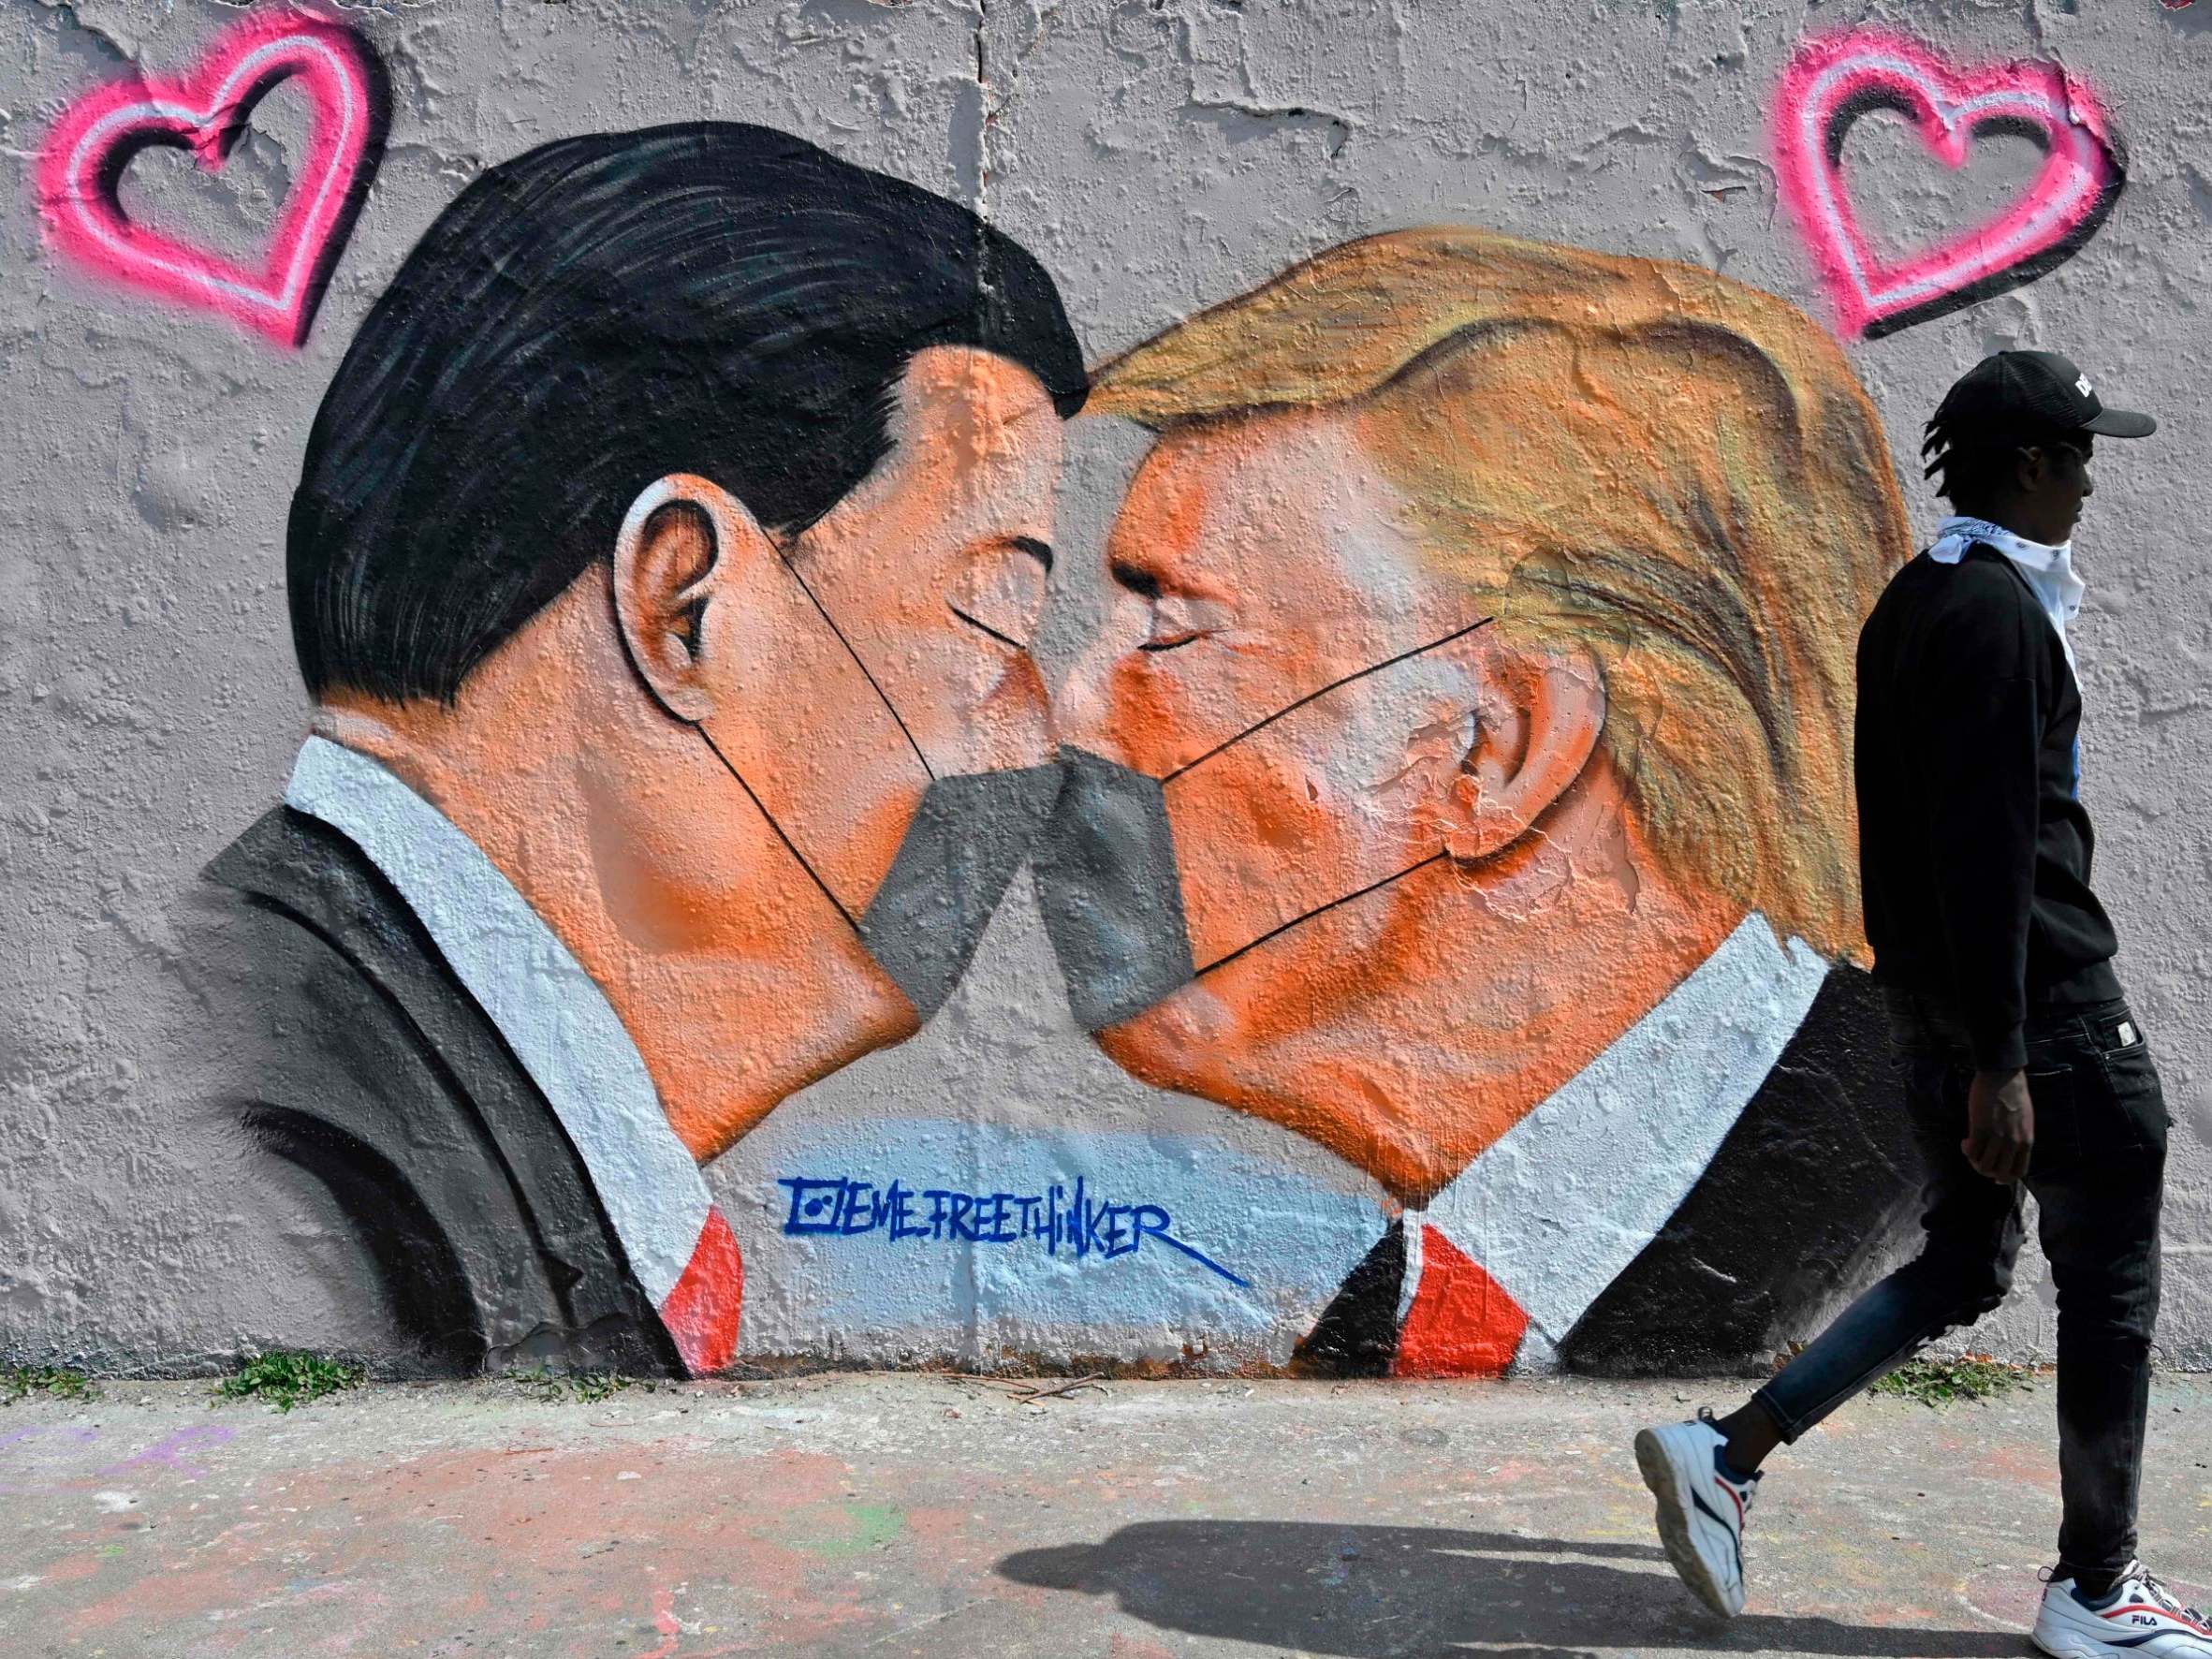 A graffiti mural of Donald Trump and Xi Jinping amid increased tension between China and the US over Covid-19